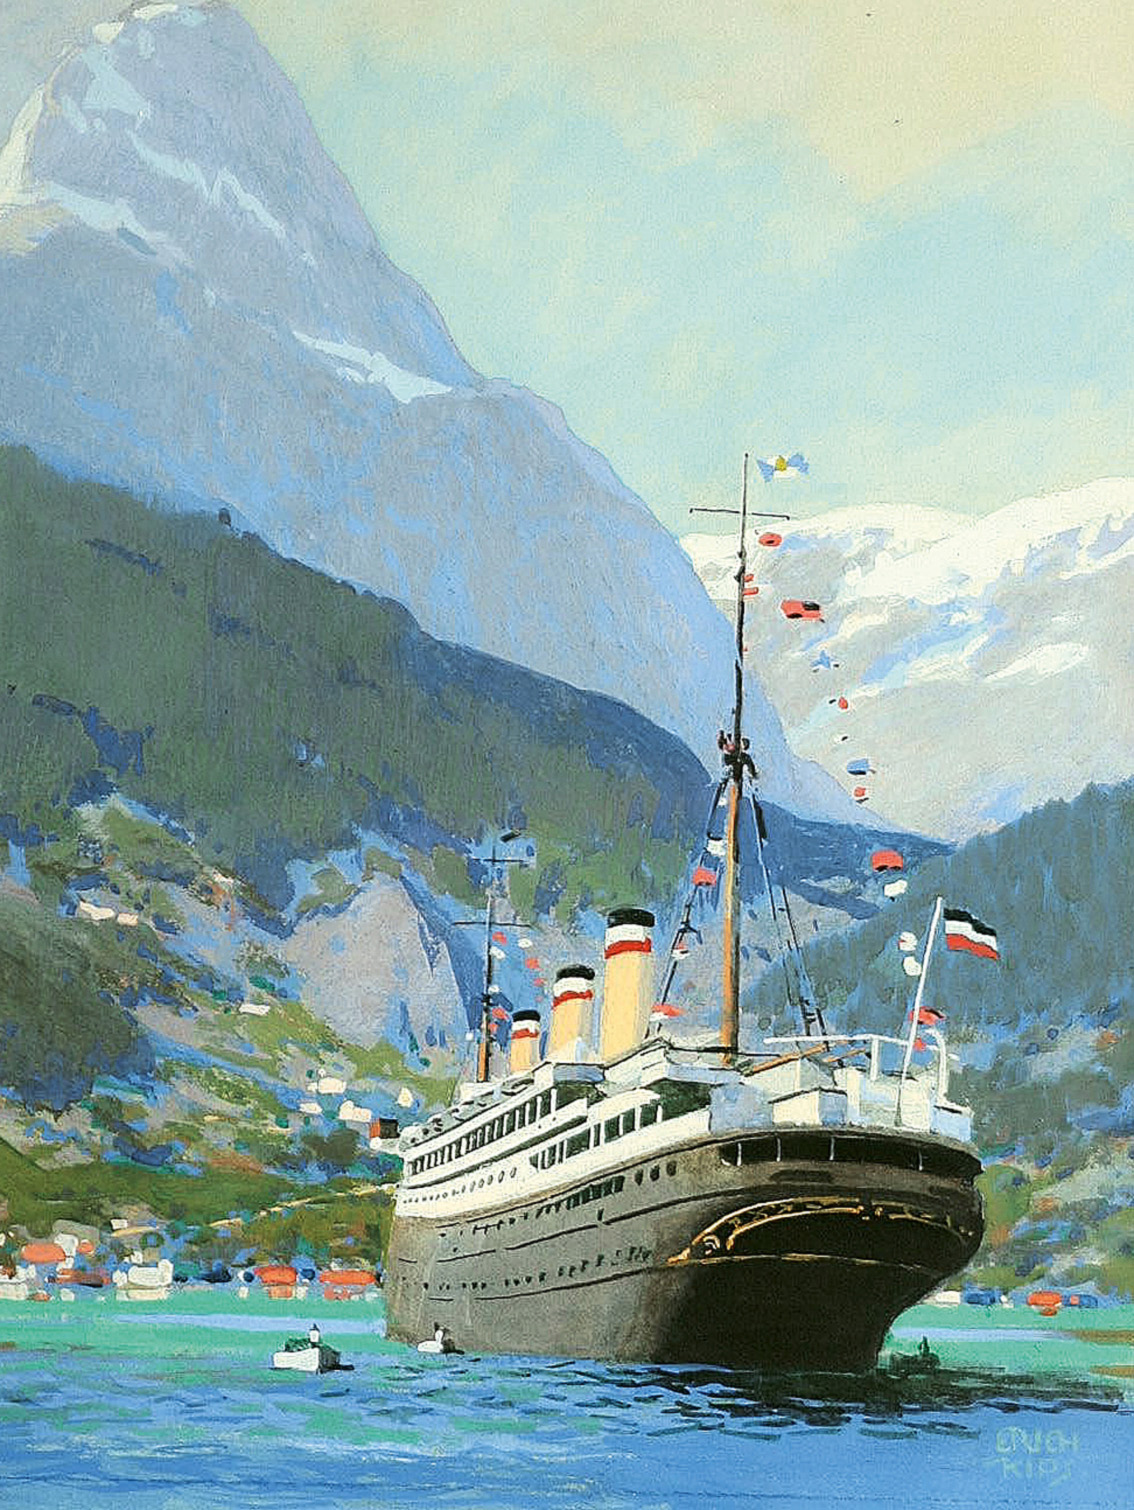 A passenger liner in the fjords